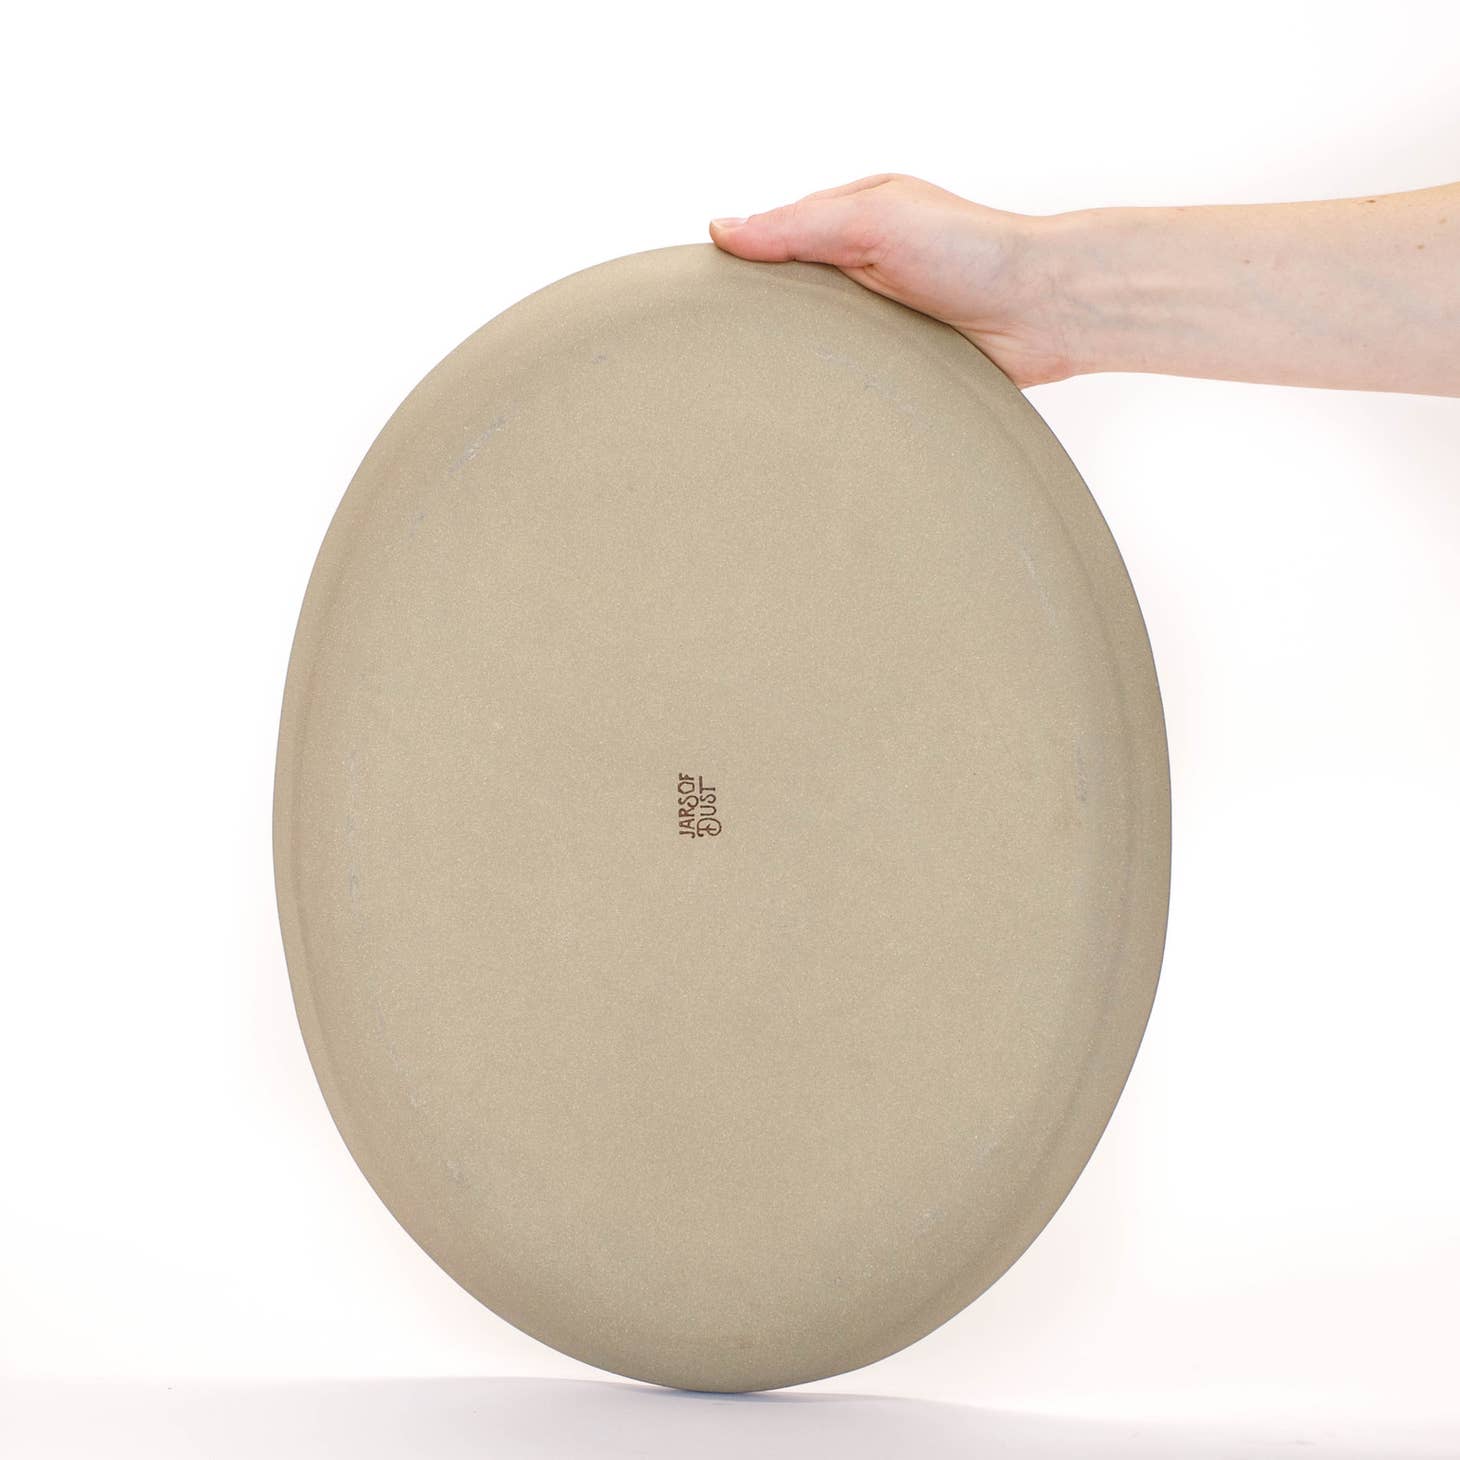 Hand-built with shallow walls, some organic quality around the rim, and a flat base, this ceramic platter is designed for serving. Use it as a charcuterie board, snack platter, coffee table tray, or your main course!  Handmade in Virginia